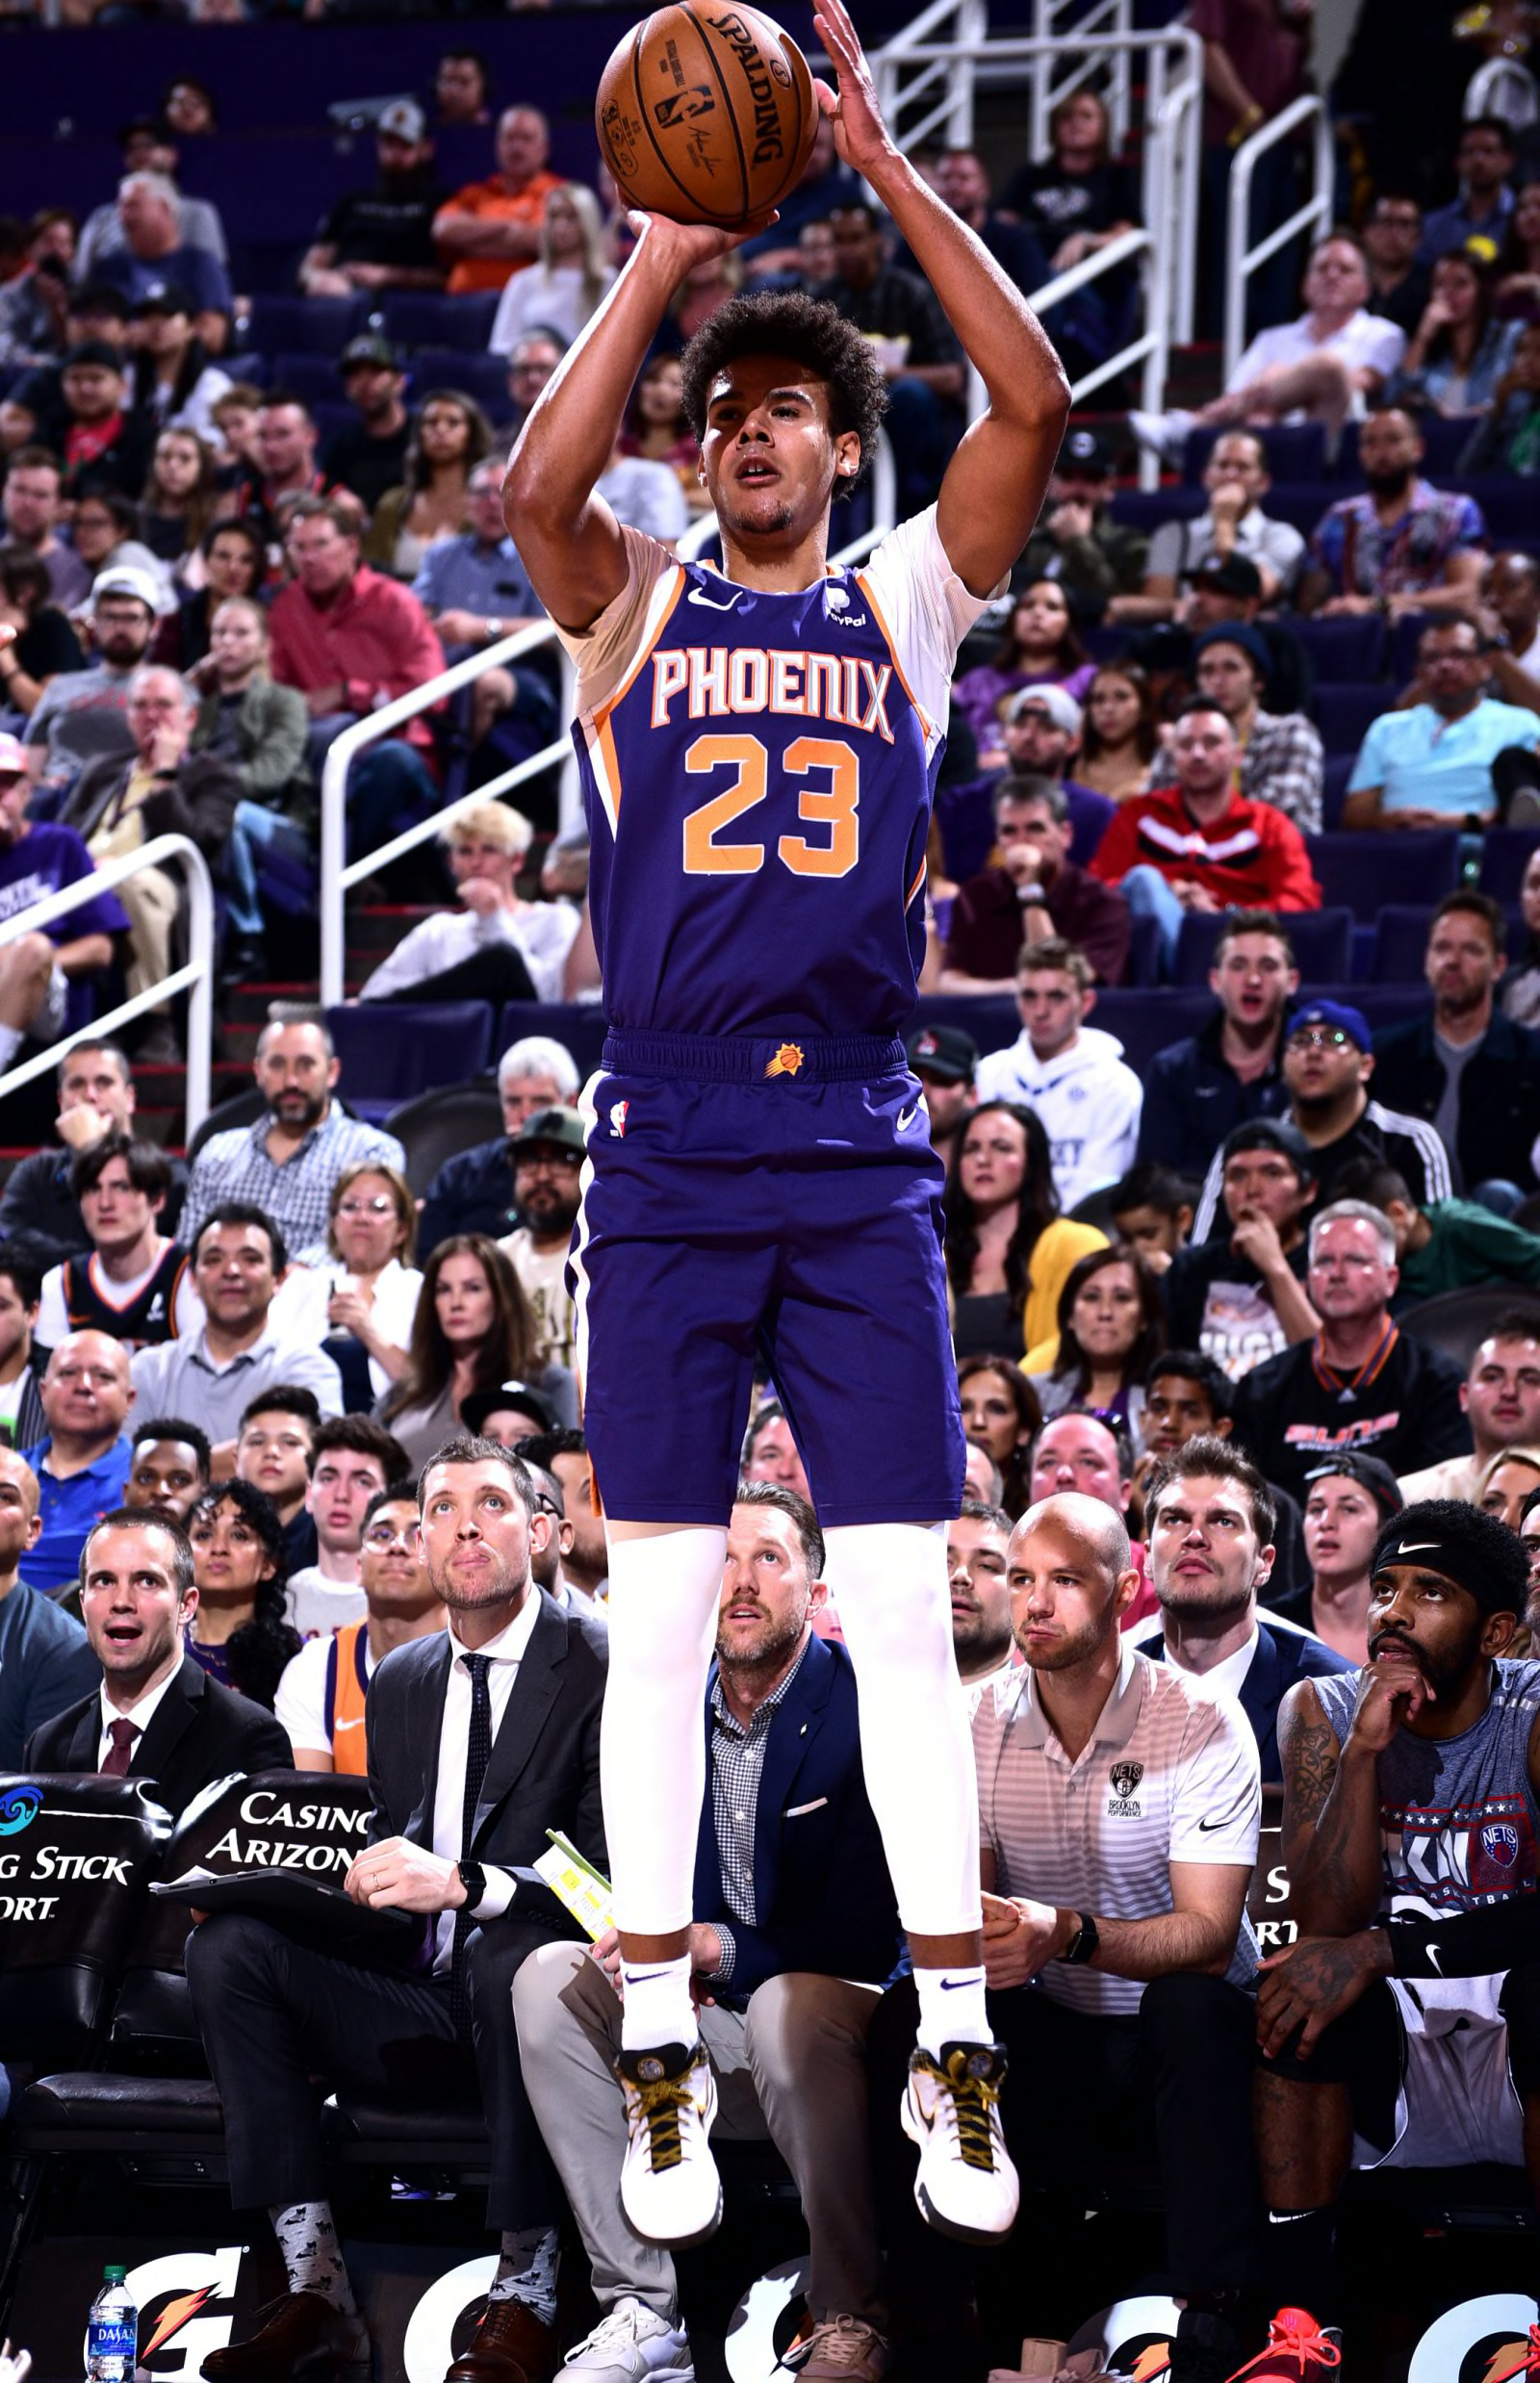 Why they are winning: The Phoenix Suns are a good 3-point shooting team